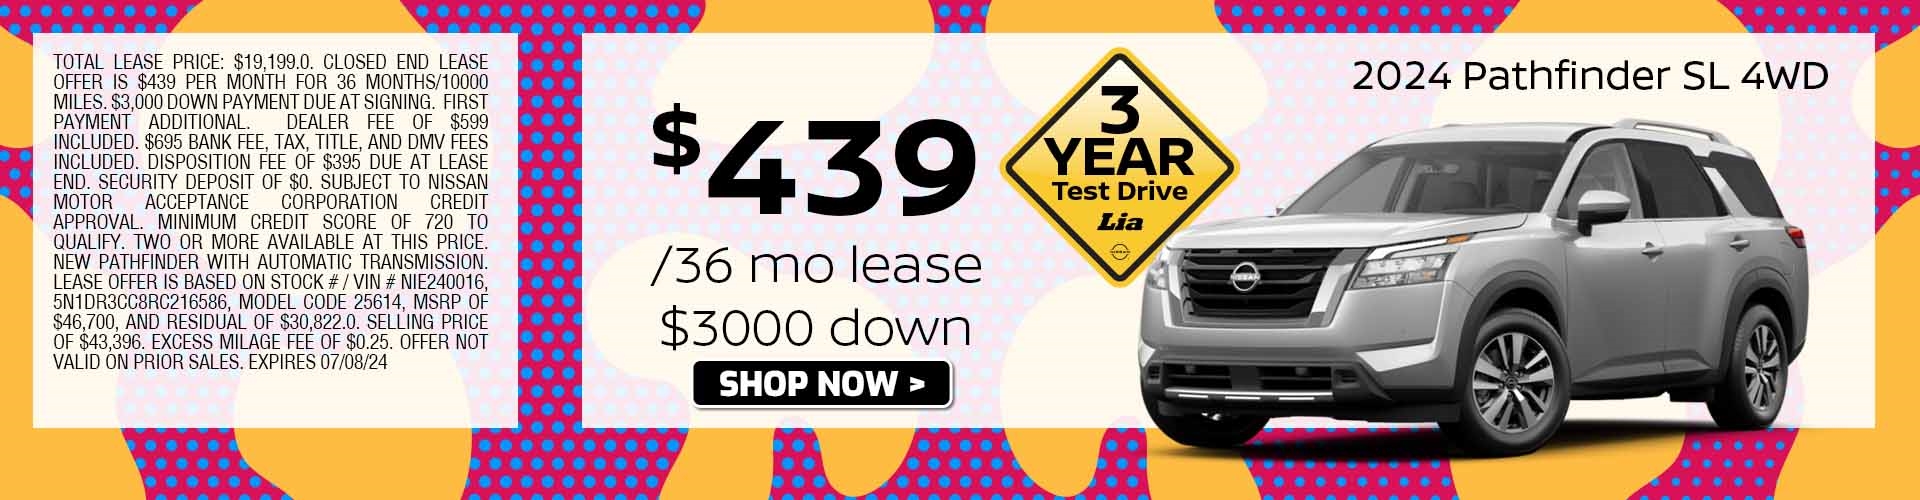 pathfinder lease special